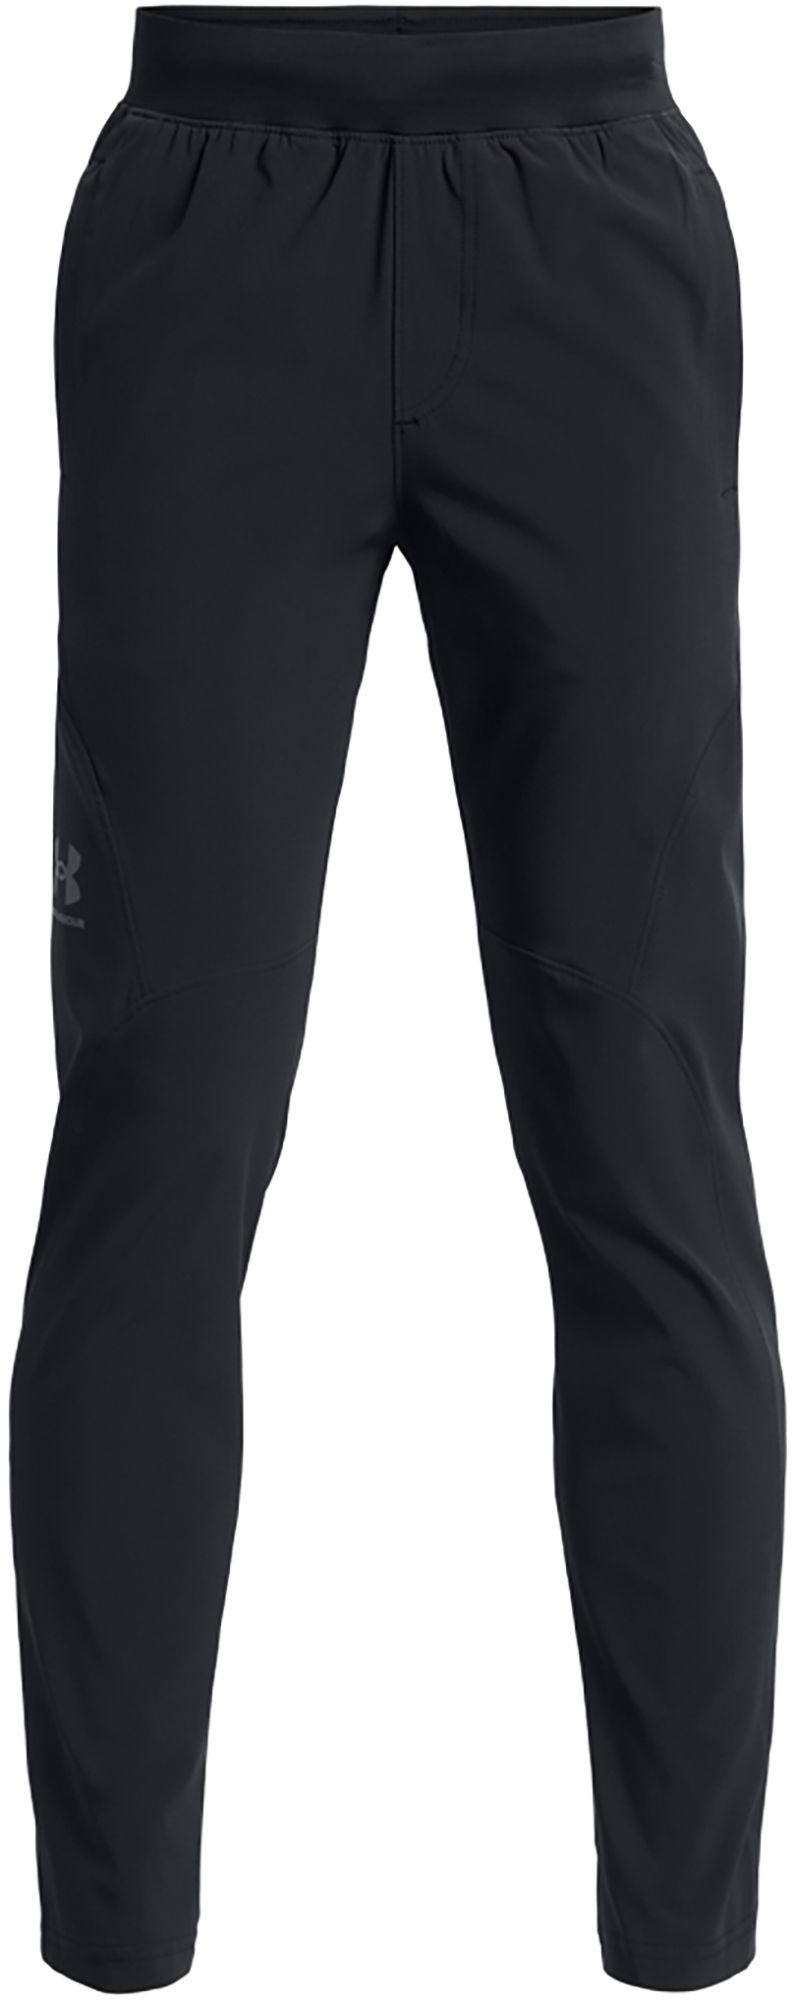 Dick's Sporting Goods Under Armour Boys' Unstoppable Tapered Training Pants